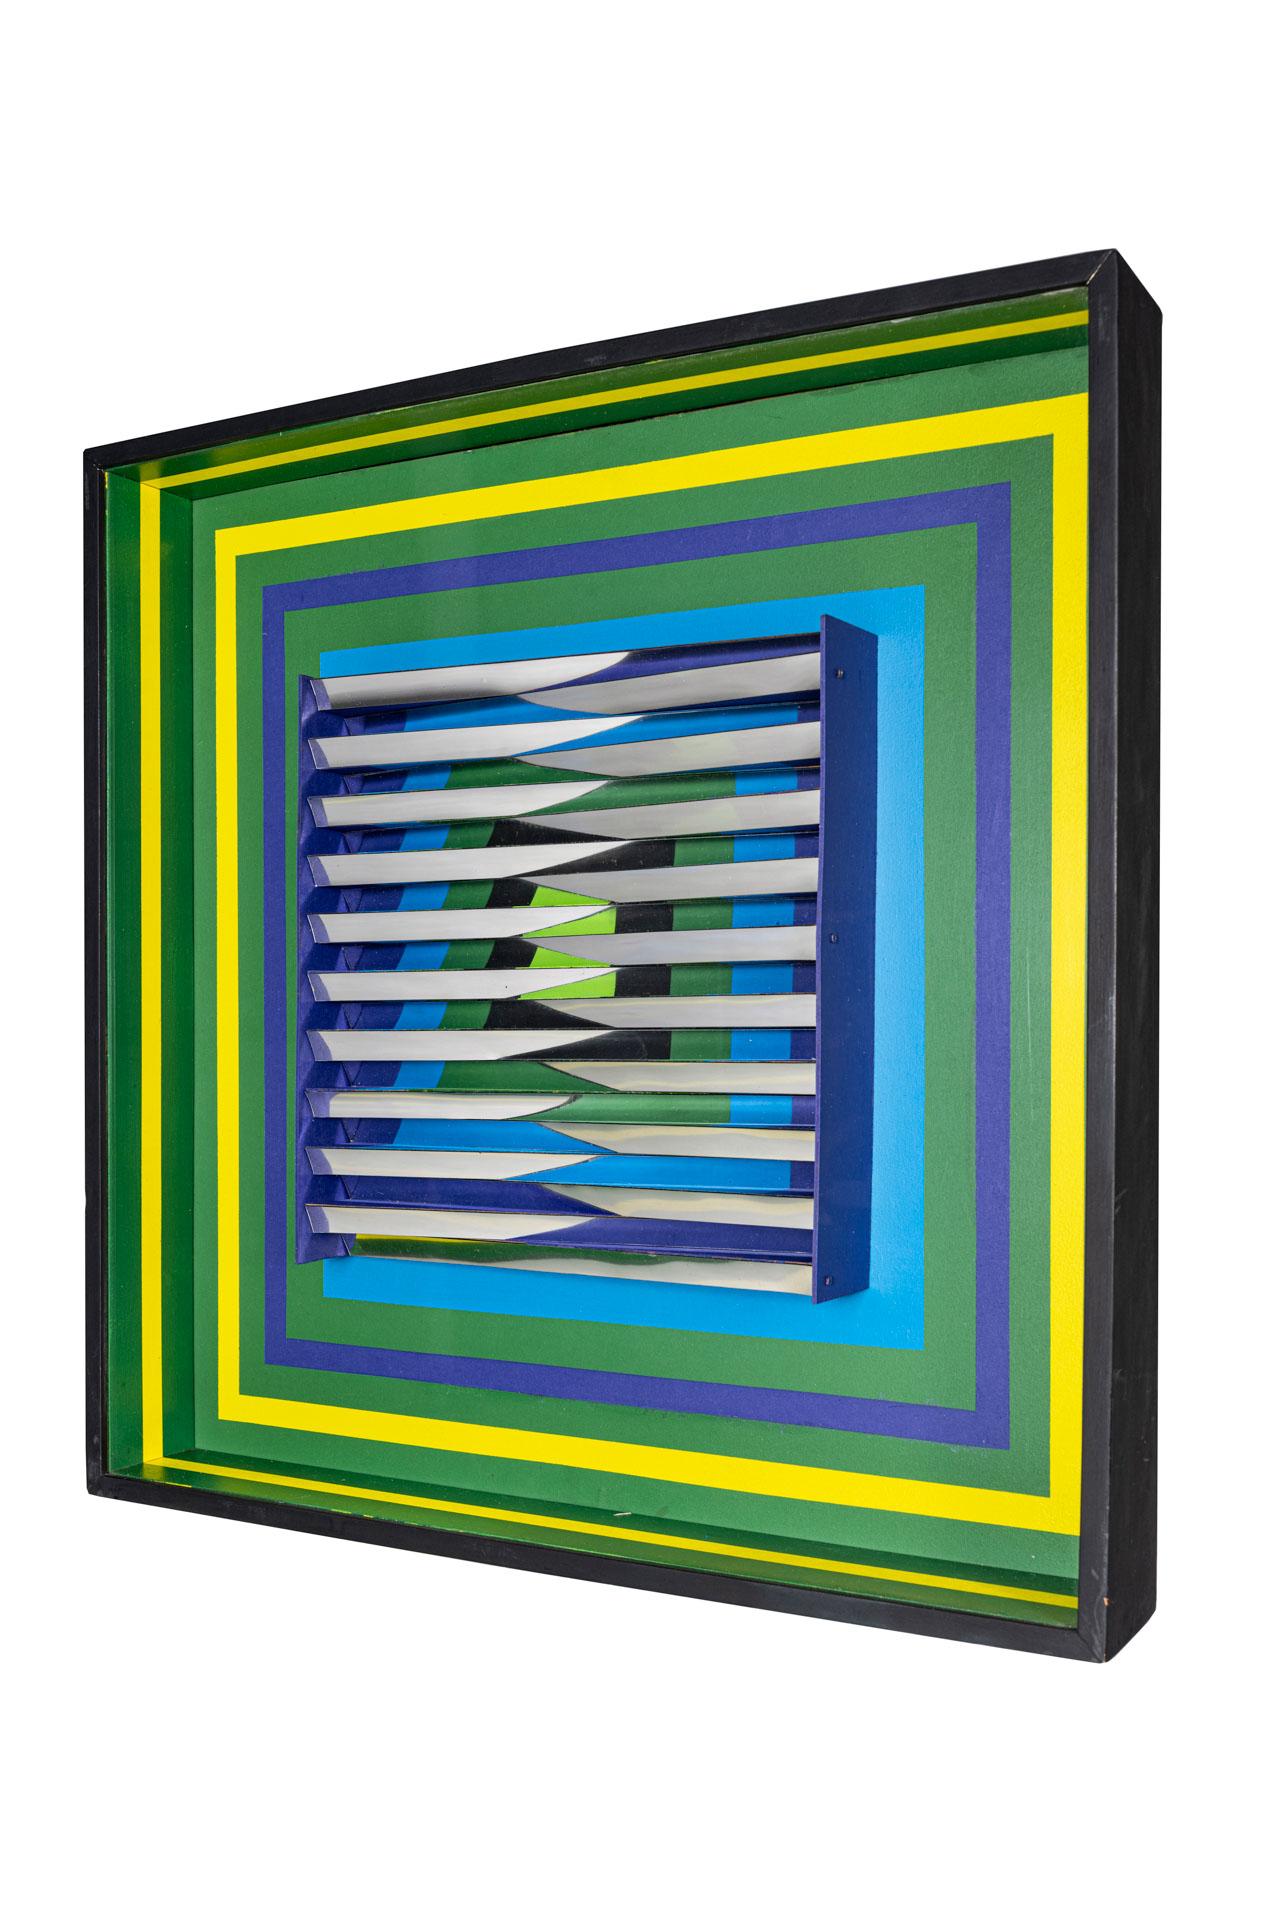 Víctor Valera, Umbria, 1975, Polychromed wood and vinyl, 68 x 68 x 10 cm  - Brown Abstract Painting by Victor Valera